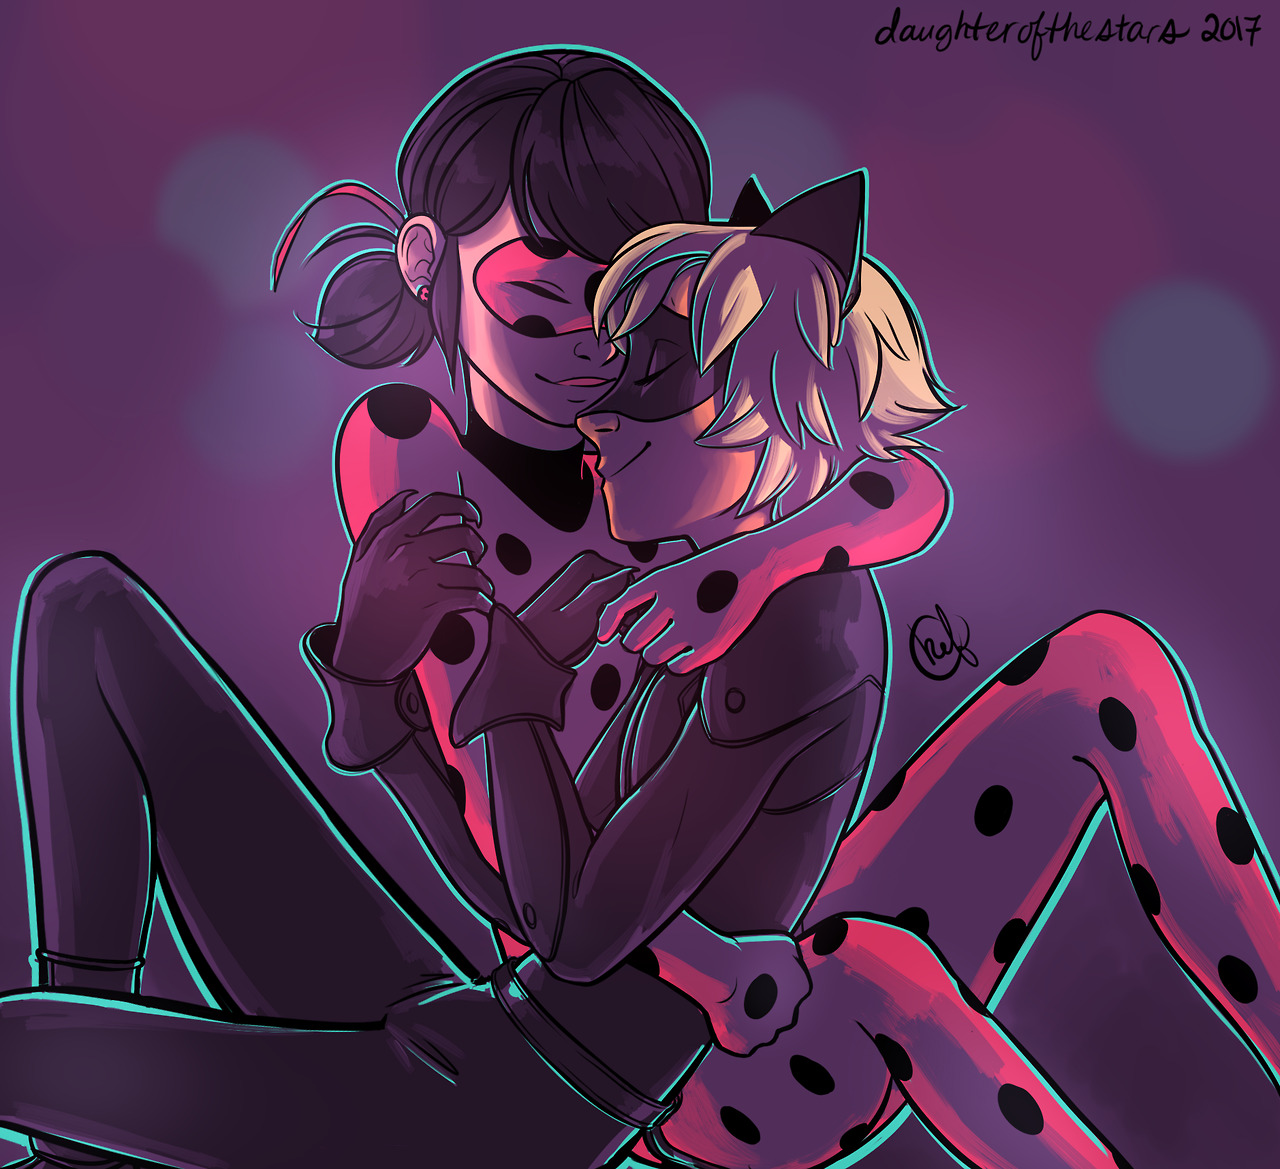 Discover the most erotic ladybug and chat noir fan art online